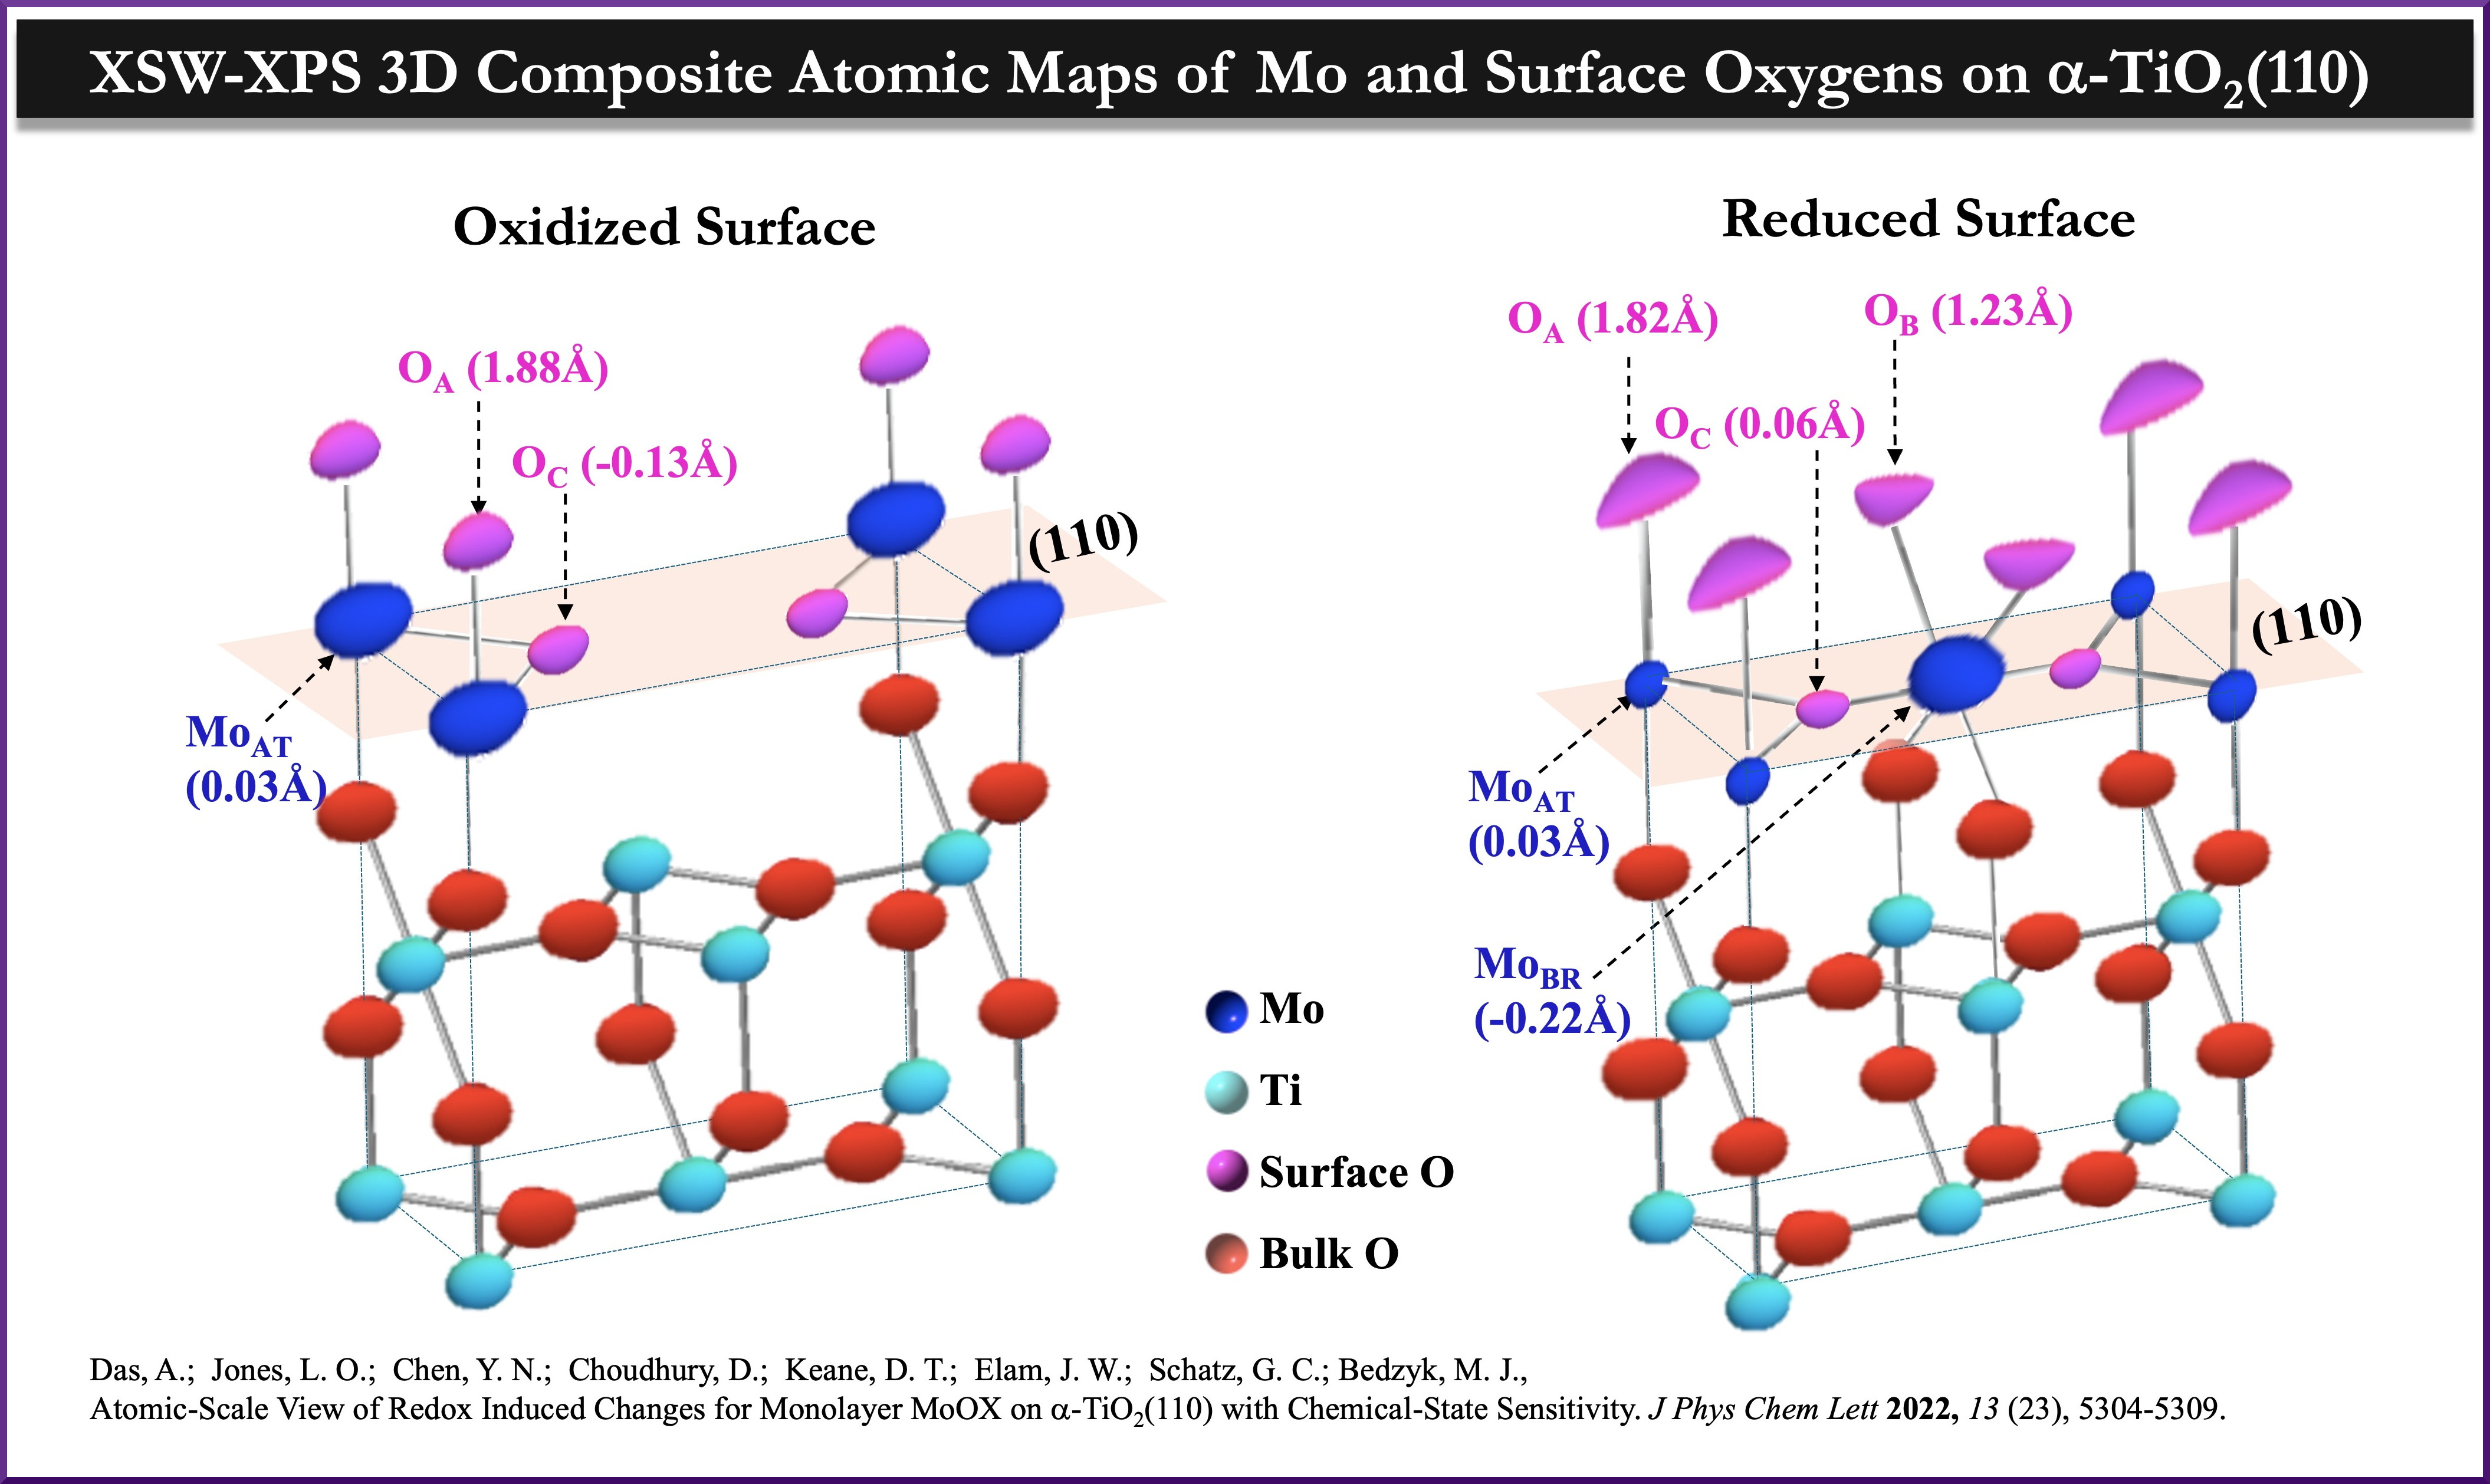 XSW-XPS 3D composite atomic maps of molybdenum and surface oxygens on alpha-TiO2(110): Comparison of structure of oxidized surface and reduced surface. Reference: Das, A.;  Jones, L. O.;  Chen, Y. N.;  Choudhury, D.;  Keane, D. T.;  Elam, J. W.;  Schatz, G. C.; Bedzyk, M. J., 
        Atomic-Scale View of Redox Induced Changes for Monolayer MoOX on a-TiO2(110) with Chemical-State Sensitivity. J Phys Chem Lett 2022, 13 (23), 5304-5309.